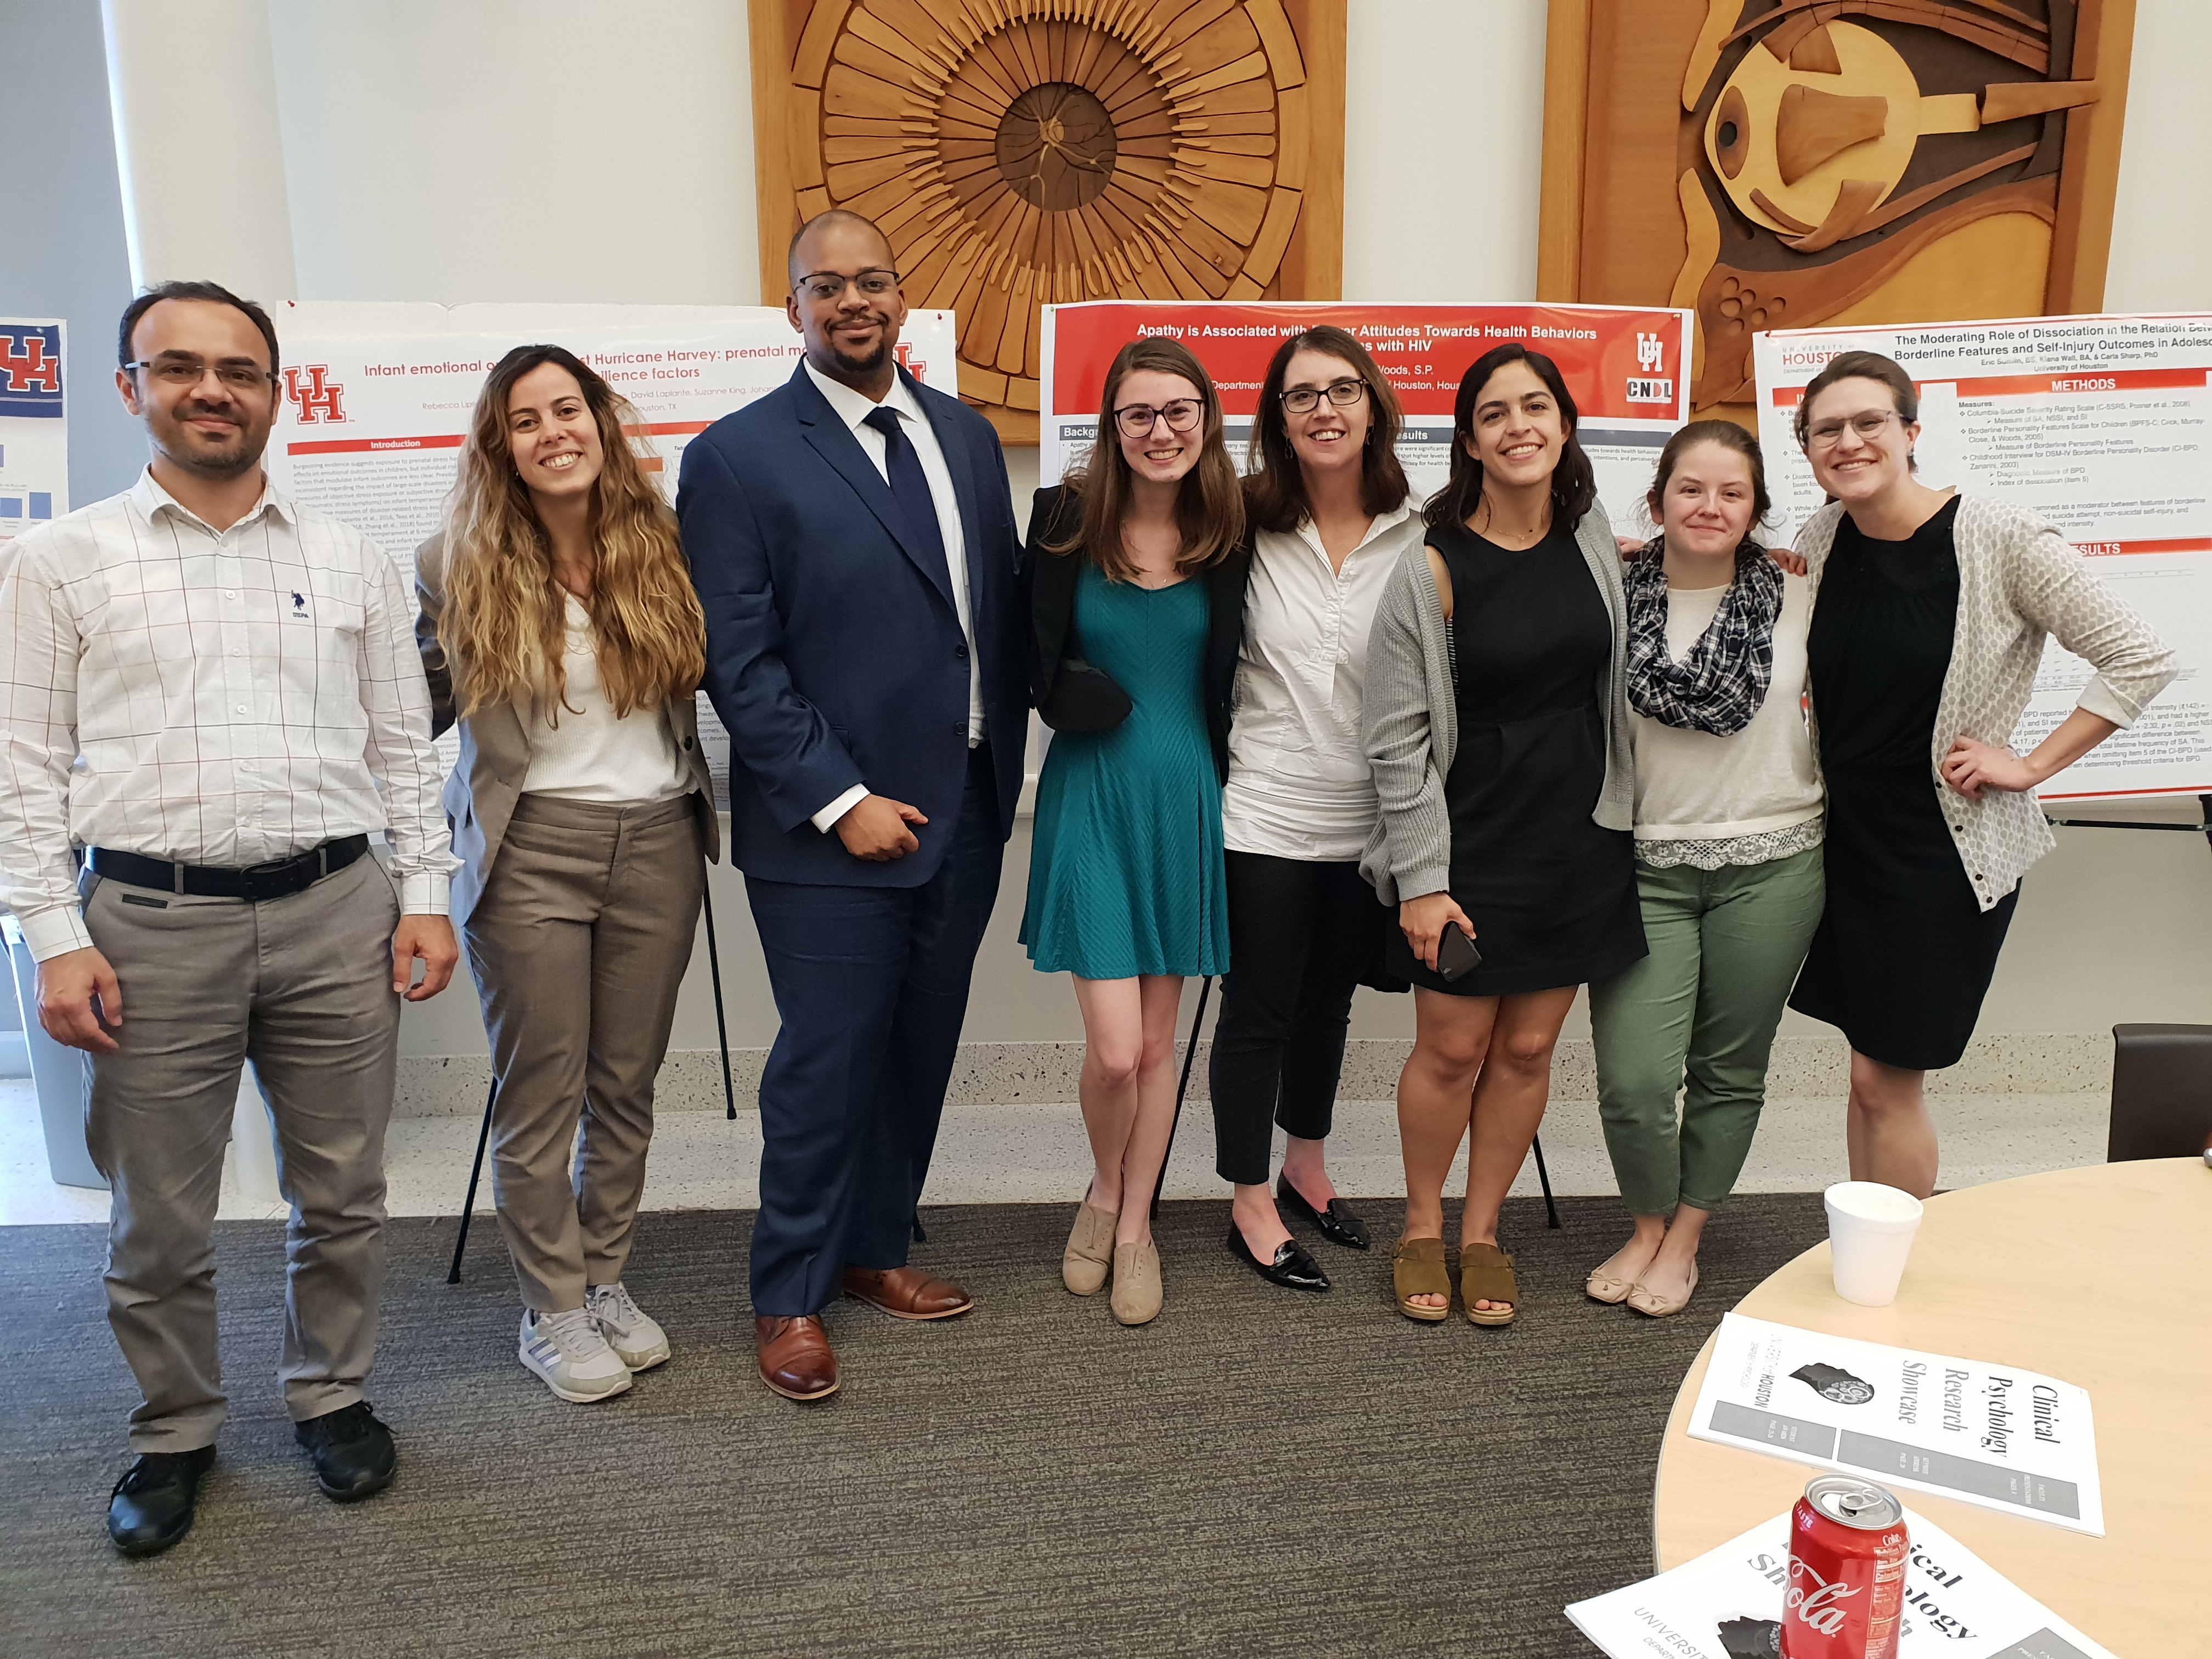 Dr. Akca, Laura Cortes, Eric, Ronnie, Dr. Sharp, Salome, Kiana and Francesca at the Clinical Psychology program’s Annual Research Showcase in 2019